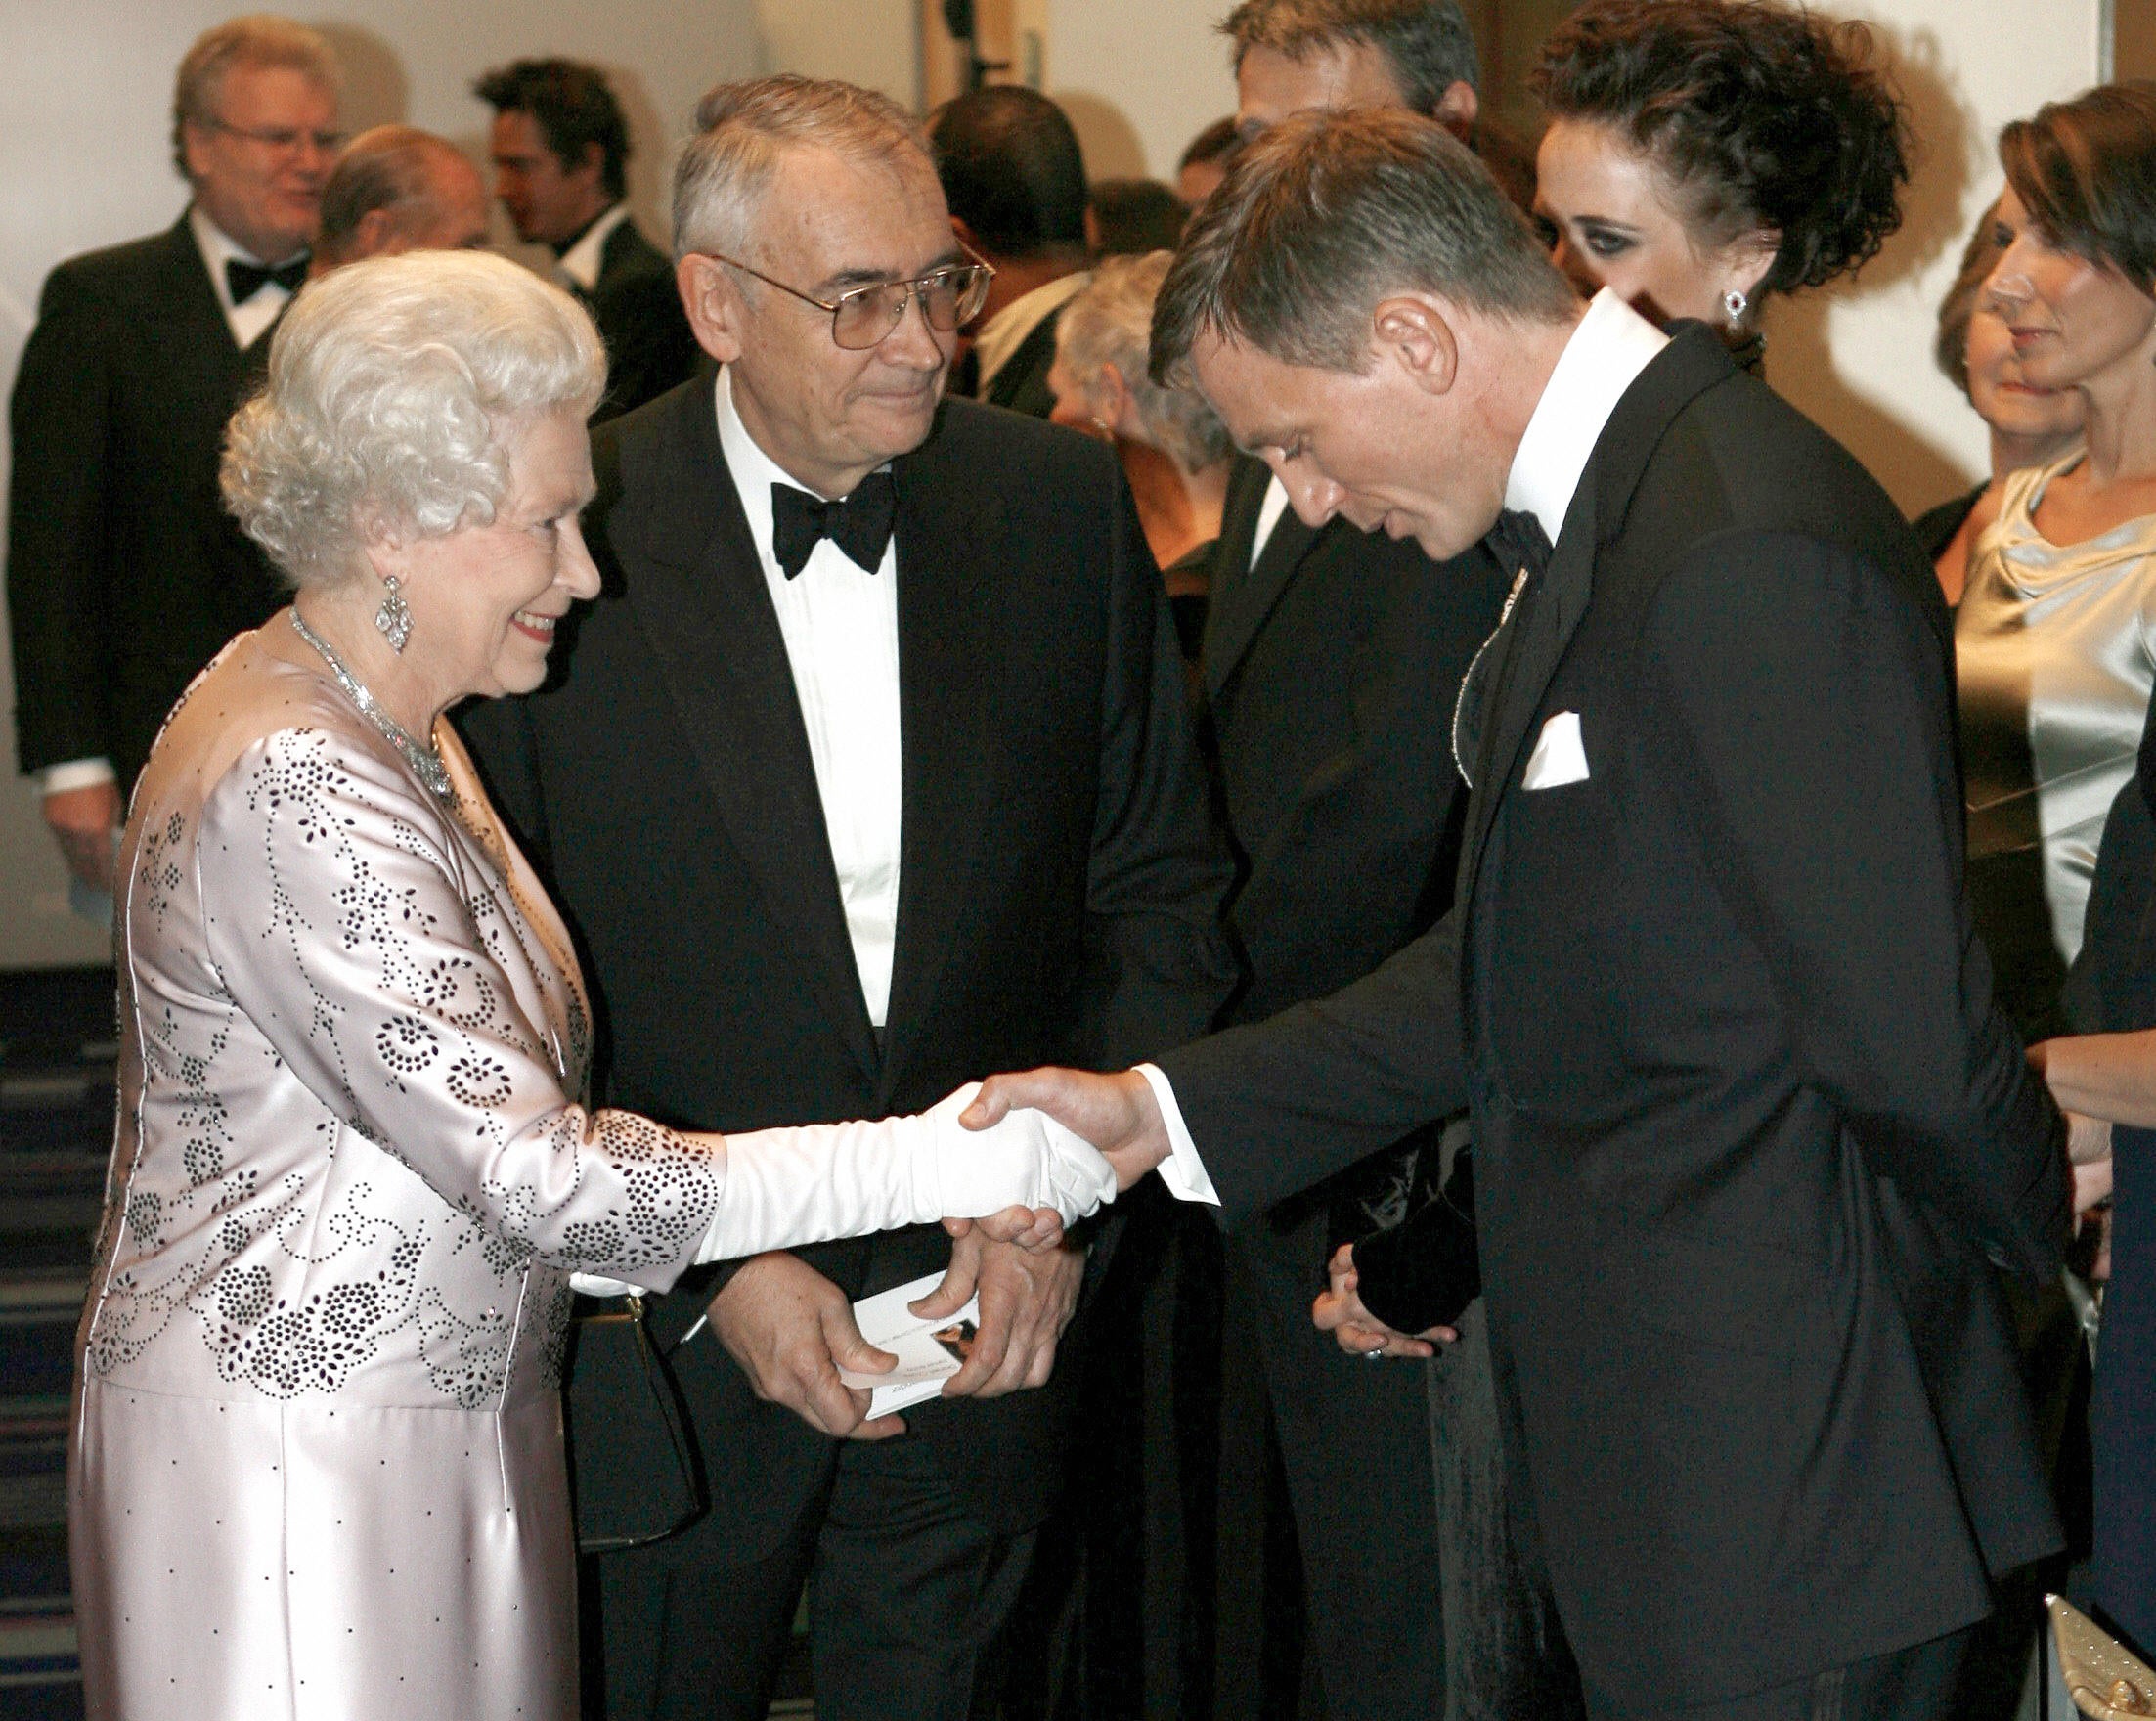 Queen Elizabeth at the world premiere of James Bond movie ‘Casino Royale’ at the Odeon cinema in Leicester Square in London, 2006